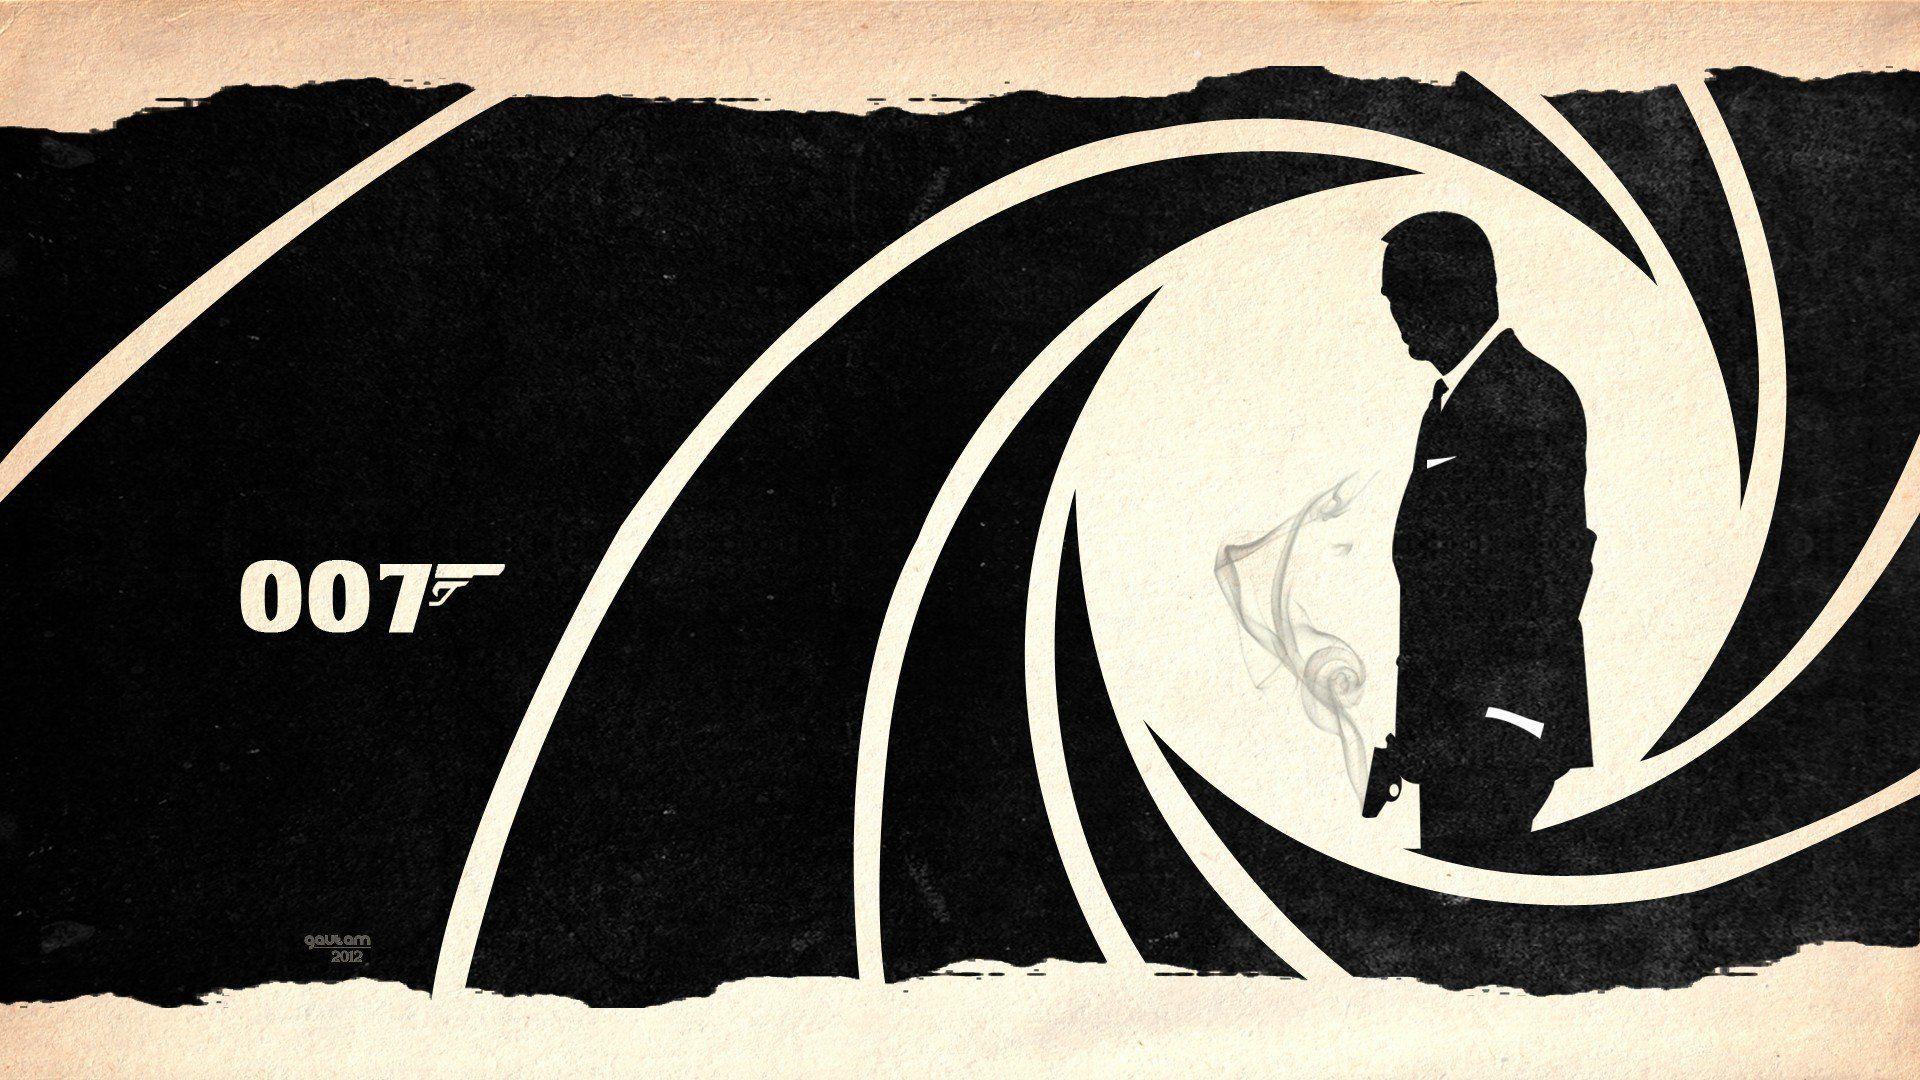 Wallpaper 007 Skyfall movie HD 2560x1440 QHD Picture Image